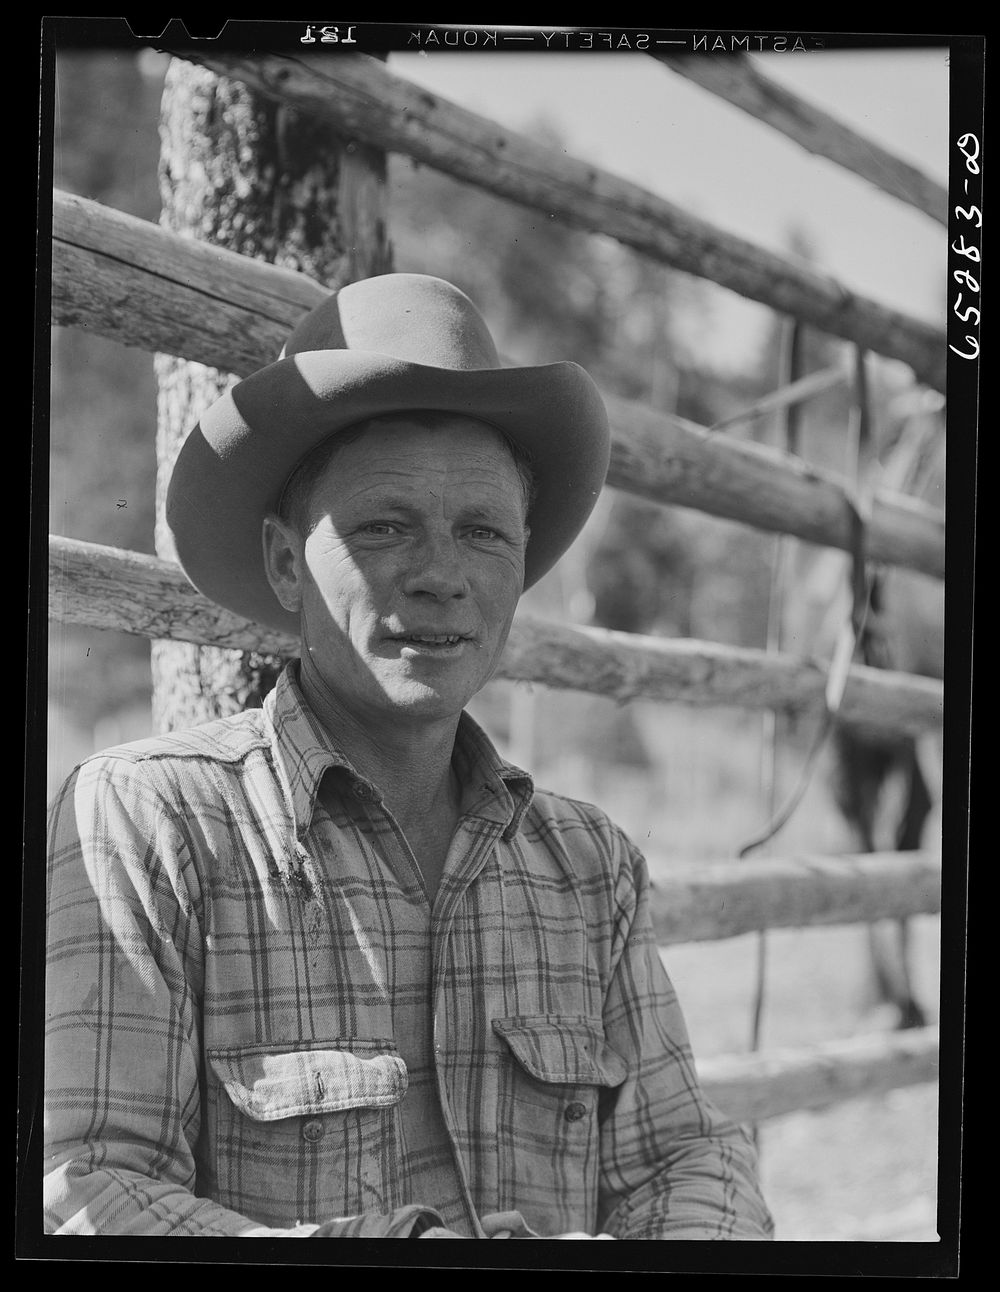 Bitterroot Valley, Ravalli County, Montana. Cowboy. Sourced from the Library of Congress.